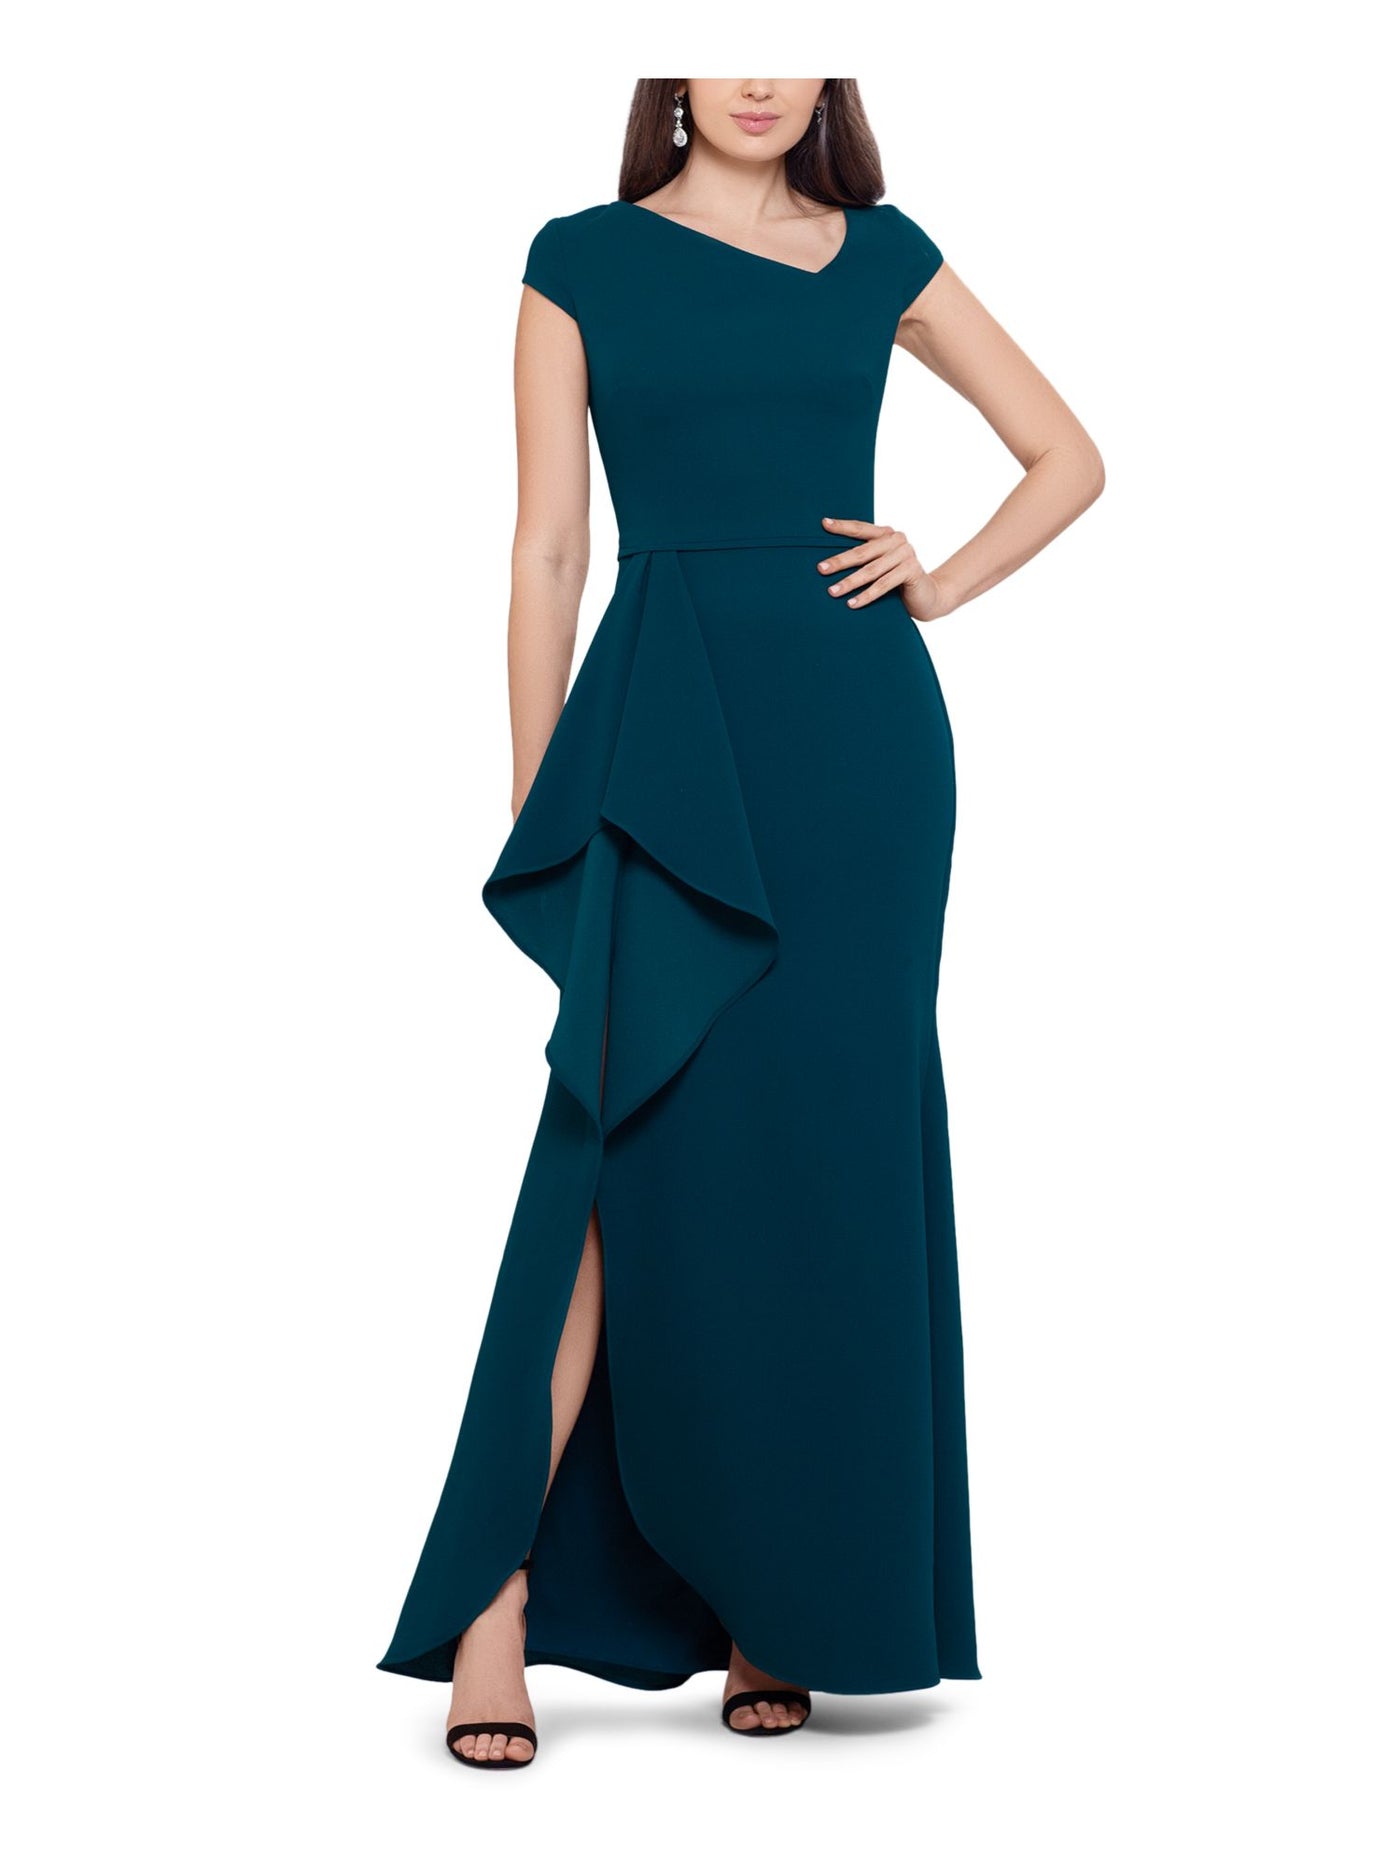 BETSY & ADAM Womens Teal Zippered Ruffle And Slit Front Side Lined Cap Sleeve Asymmetrical Neckline Full-Length Formal Gown Dress 4